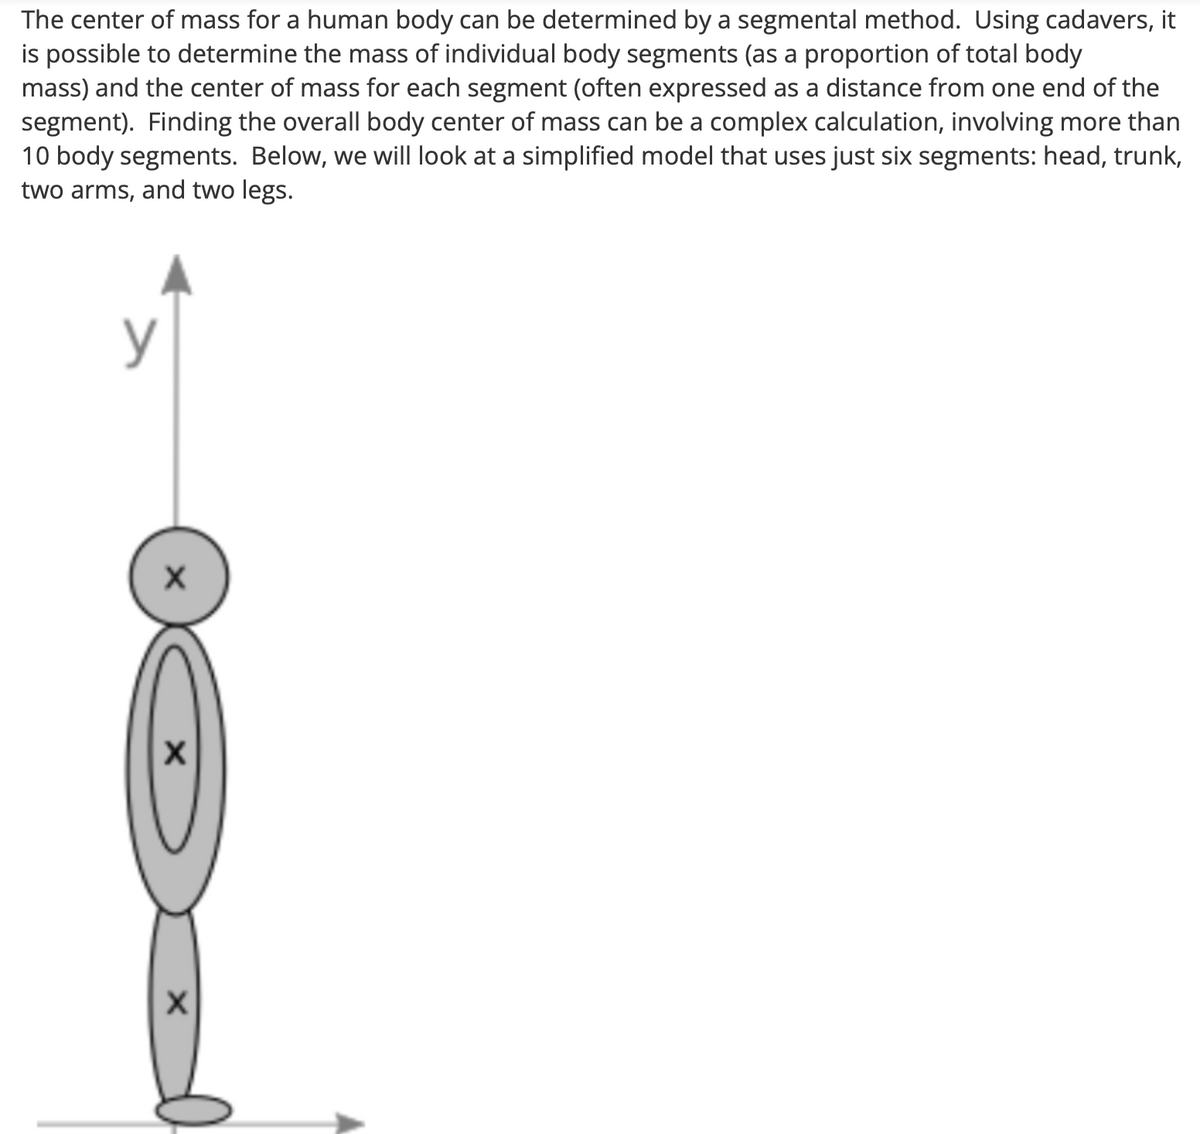 The center of mass for a human body can be determined by a segmental method. Using cadavers, it
is possible to determine the mass of individual body segments (as a proportion of total body
mass) and the center of mass for each segment (often expressed as a distance from one end of the
segment). Finding the overall body center of mass can be a complex calculation, involving more than
10 body segments. Below, we will look at a simplified model that uses just six segments: head, trunk,
two arms, and two legs.
X
X